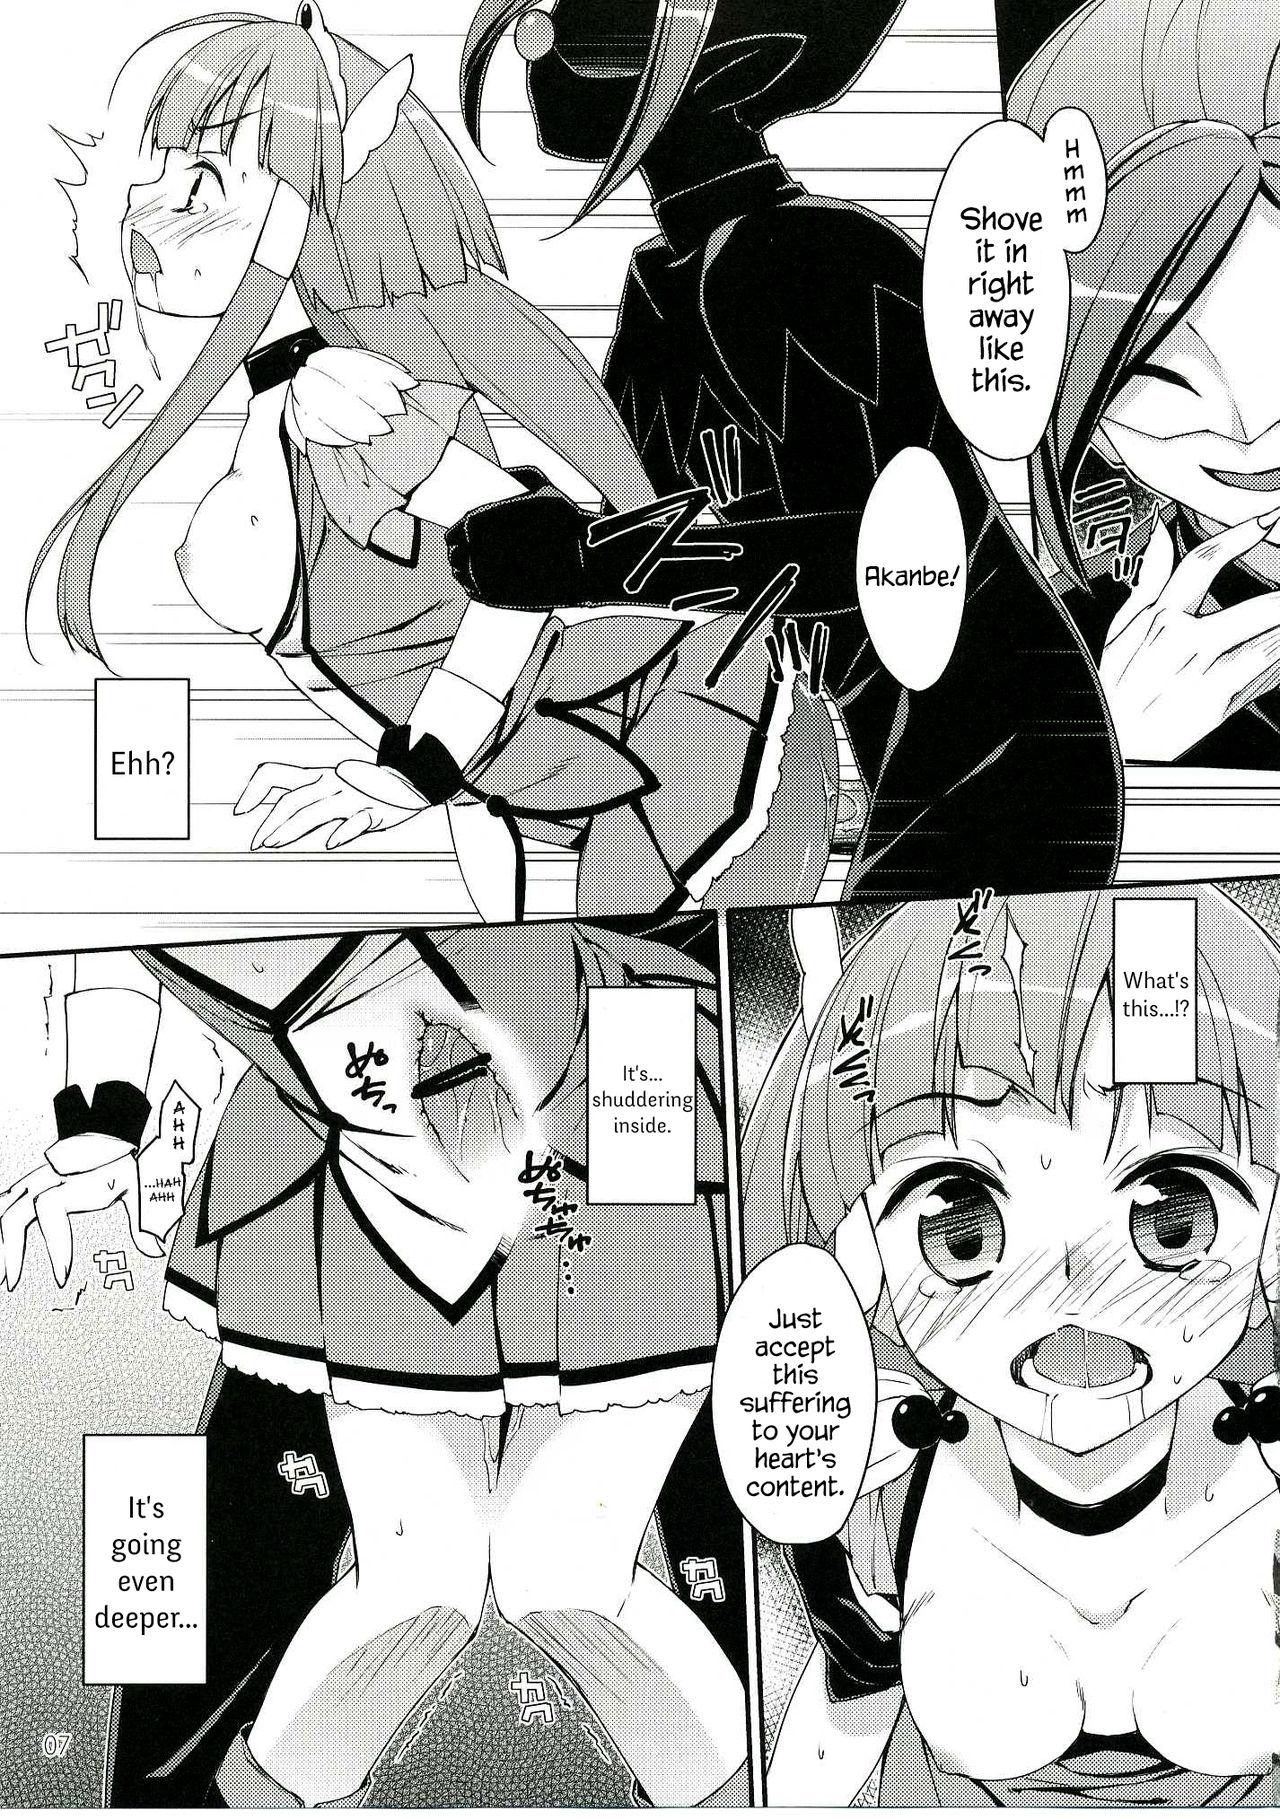 Movie Bad End Beauty - Smile precure Blowjob - Page 6